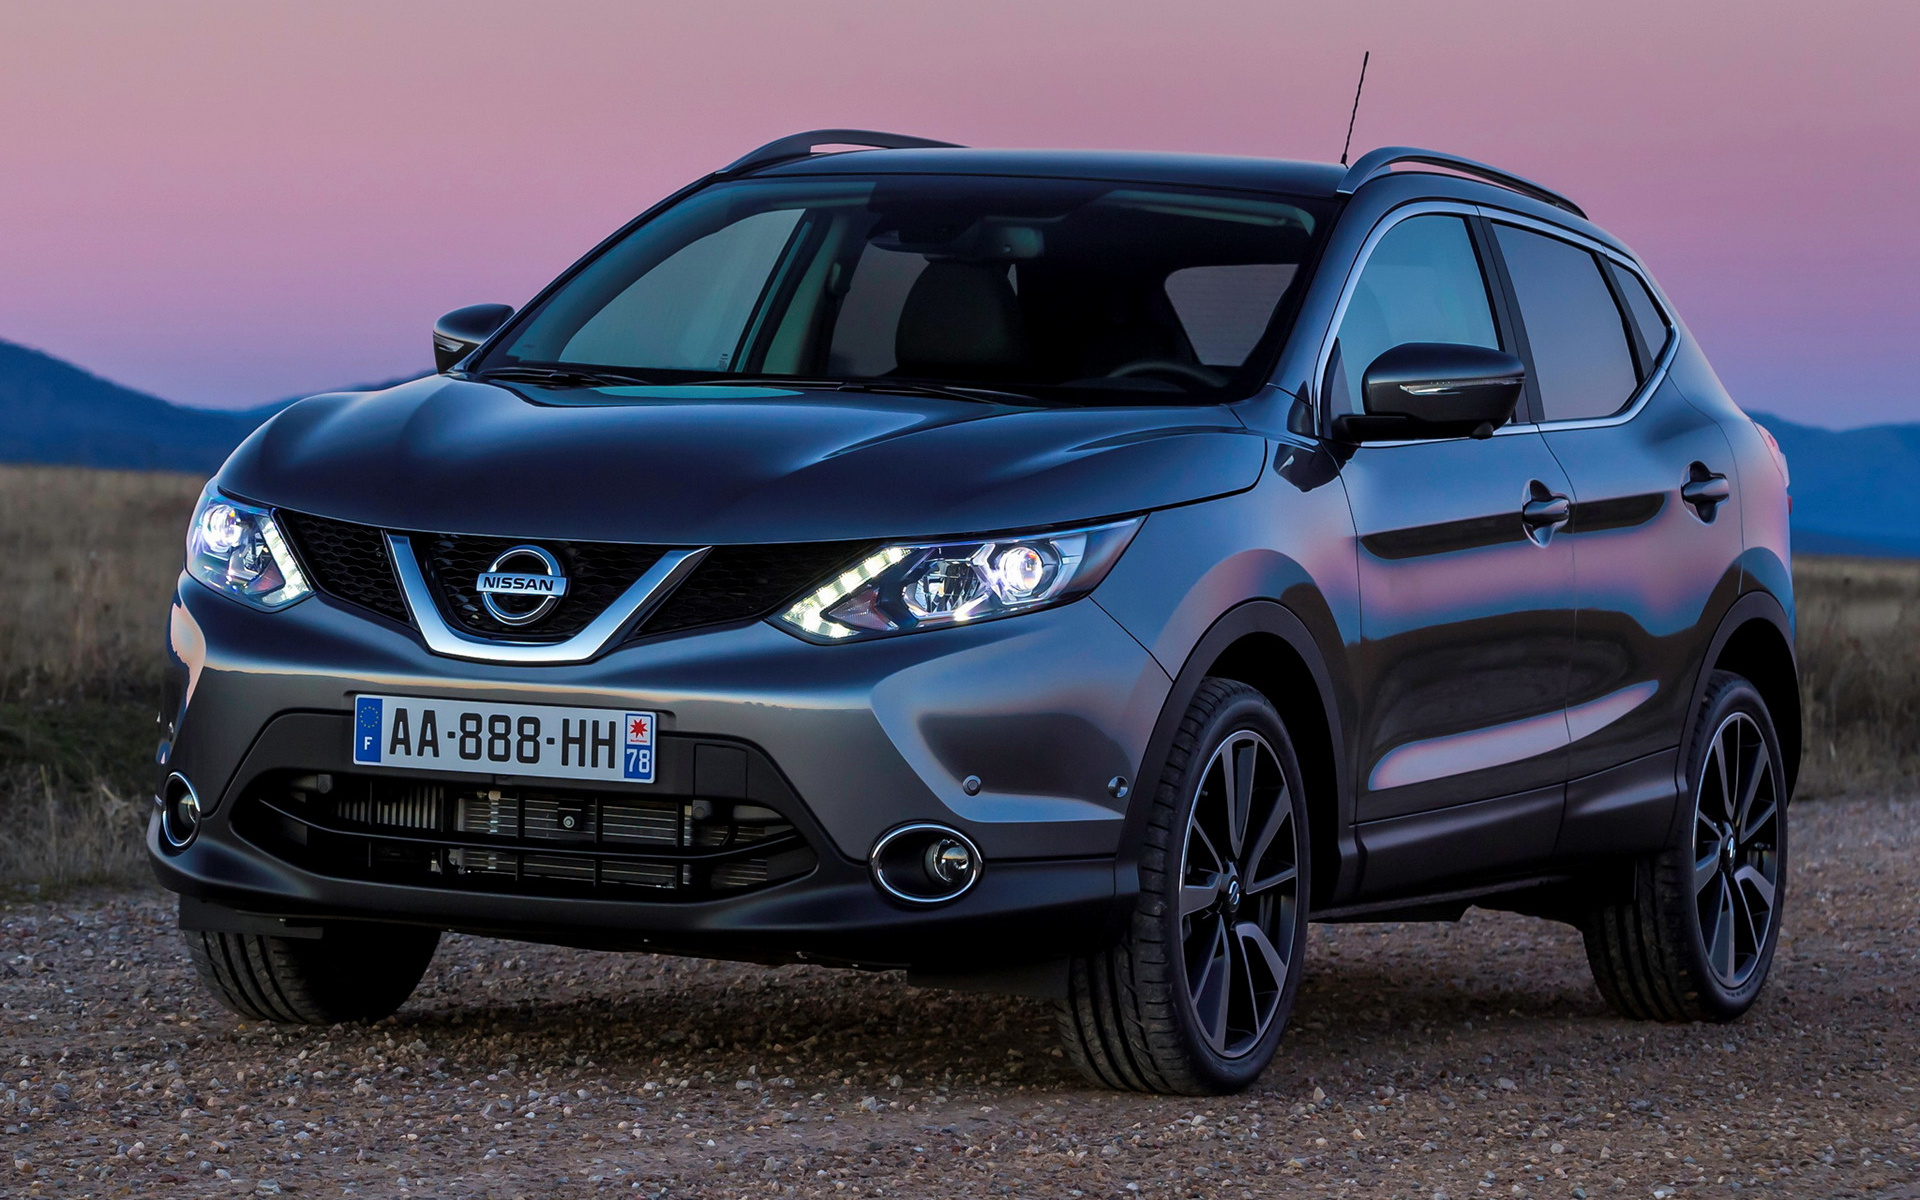 2014 Nissan Qashqai Wallpapers And Hd Images Car Pixel